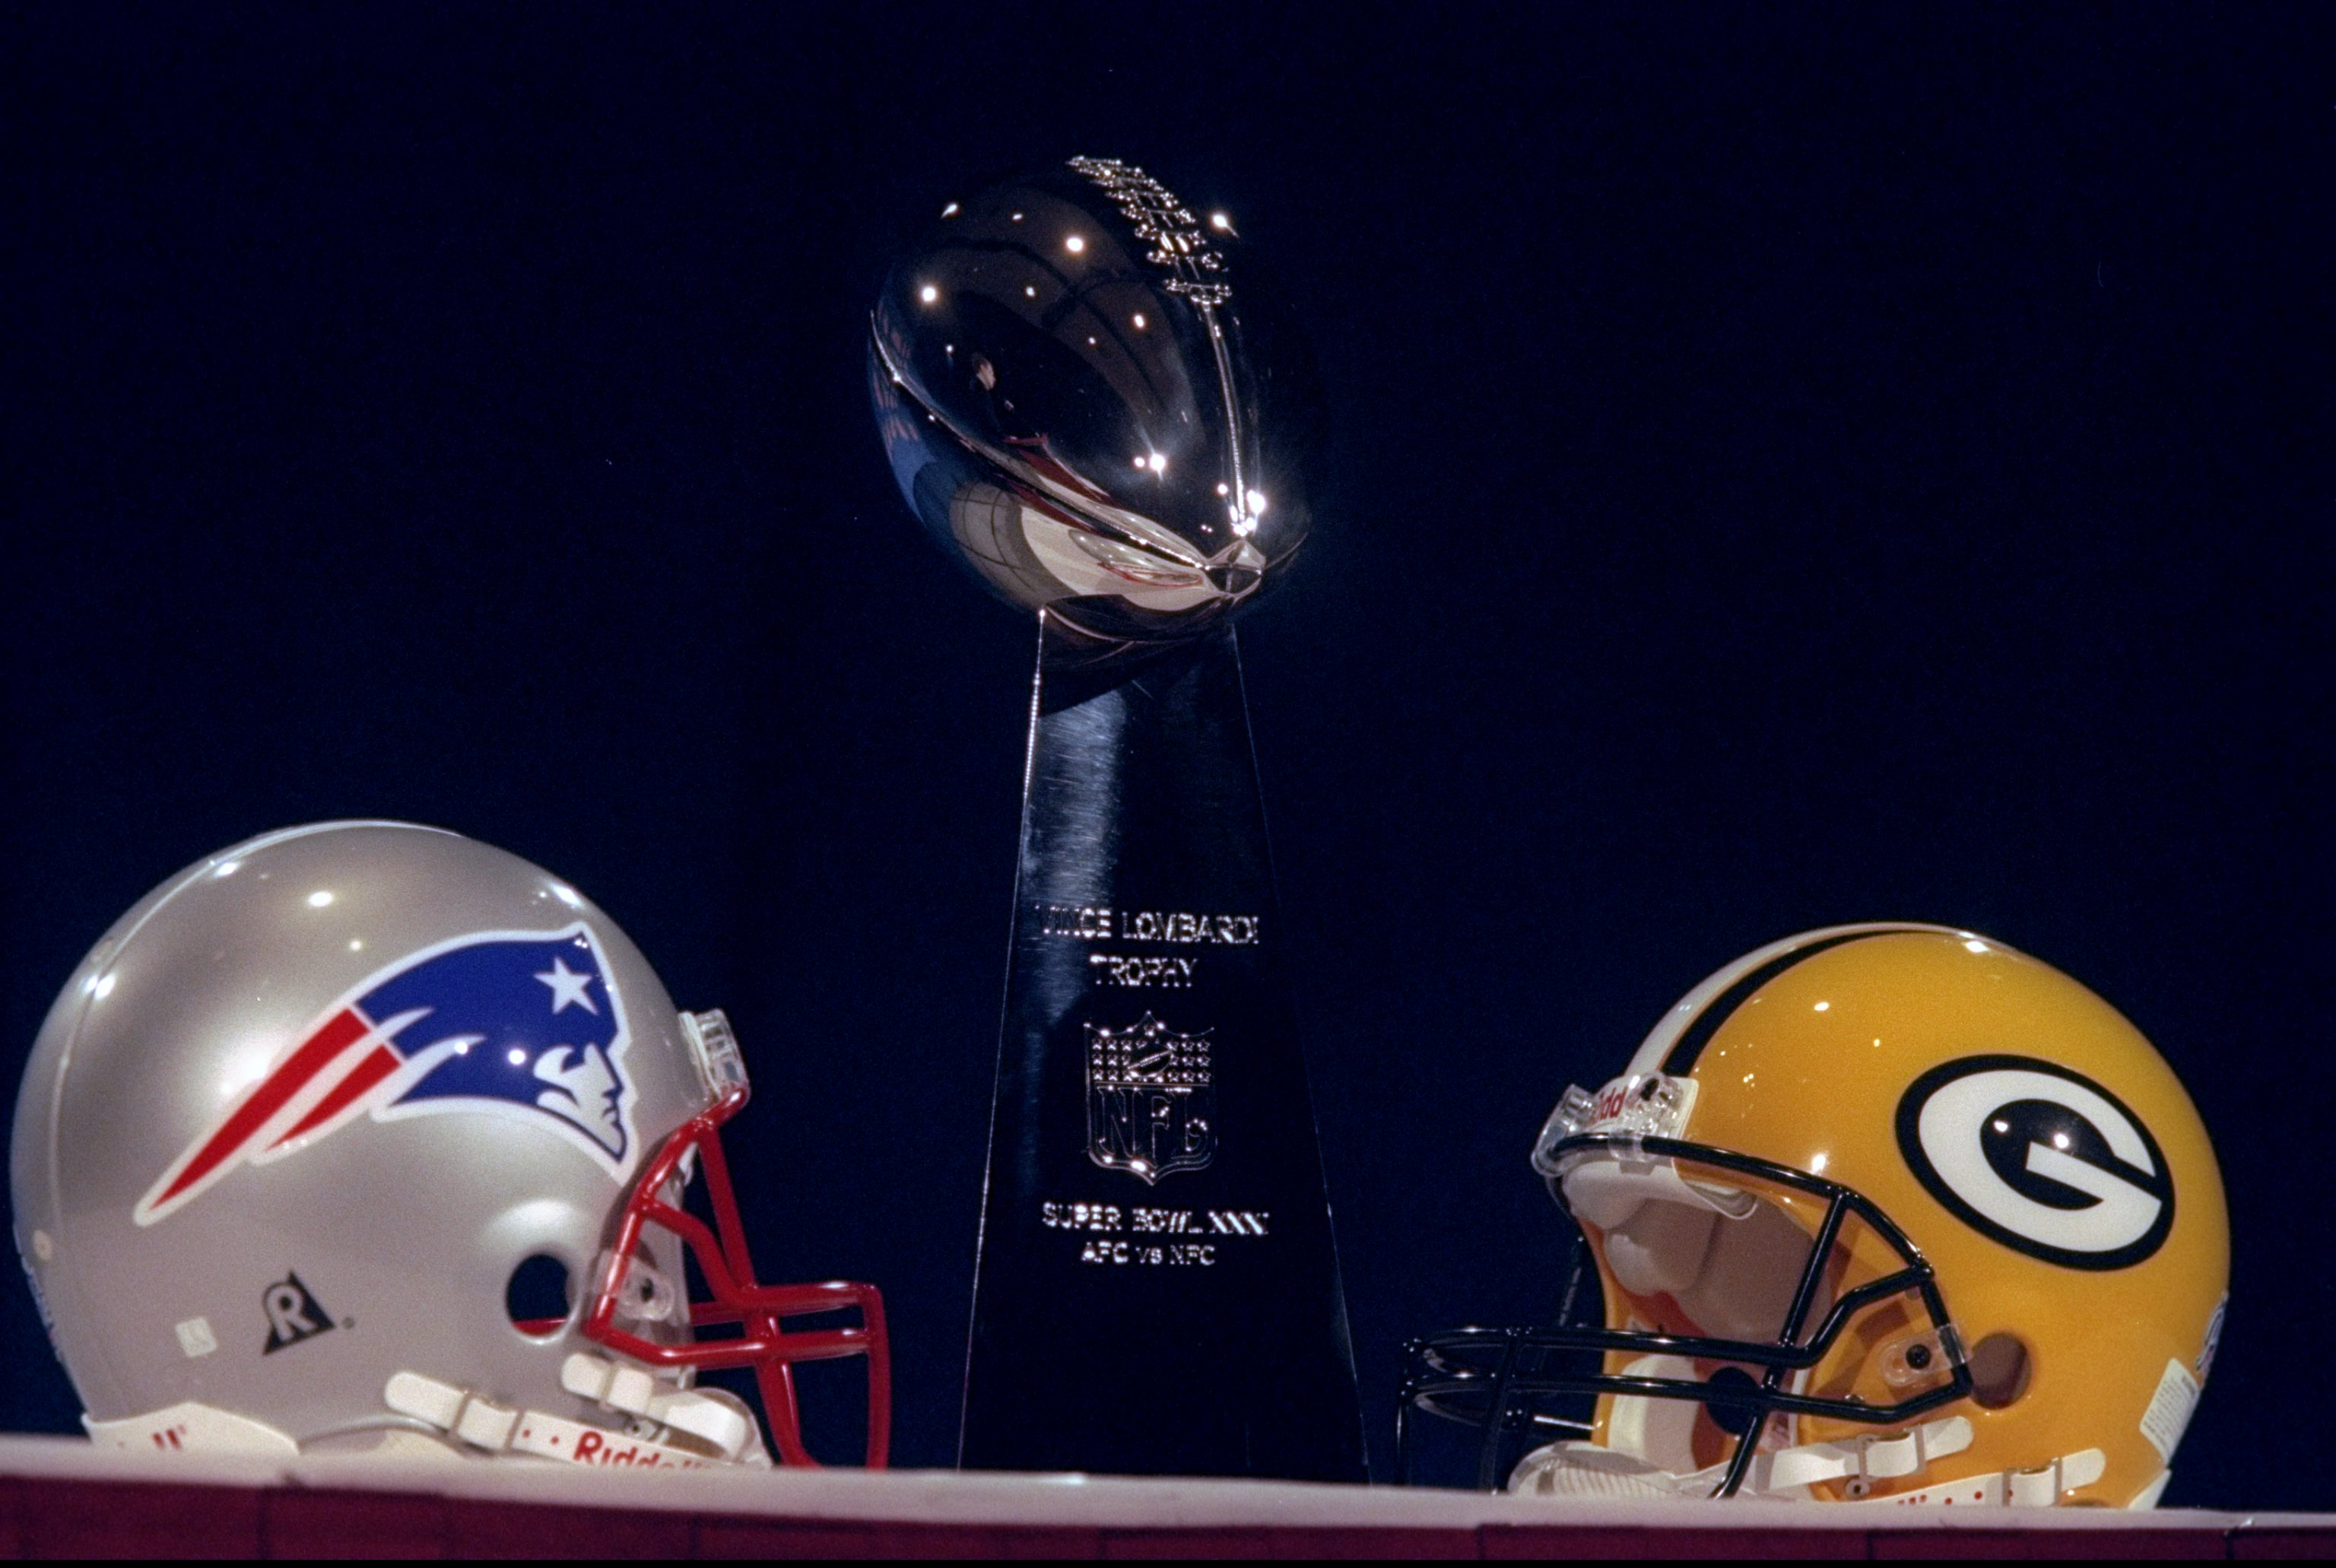 The Vince Lombardi trophy is bracketed by the helmets of the two teams that played in Super Bowl 31, the Green Bay Packers and the New England Patriots.